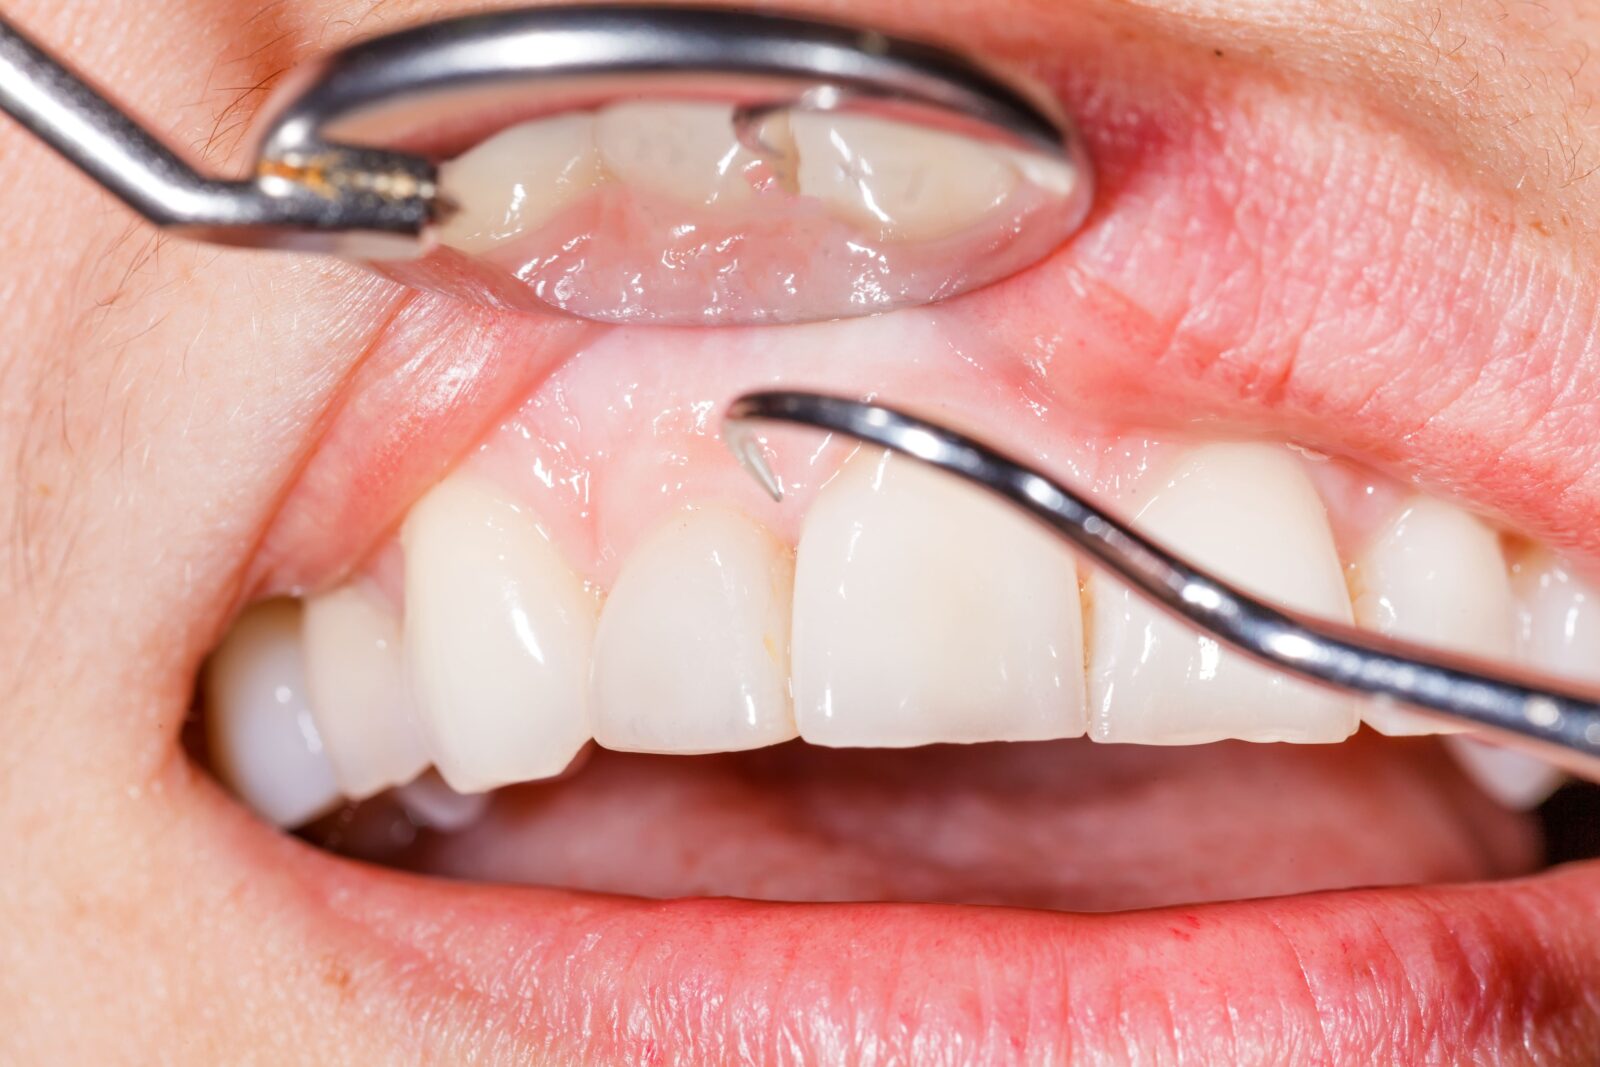 dental probe and mirror in front of teeth